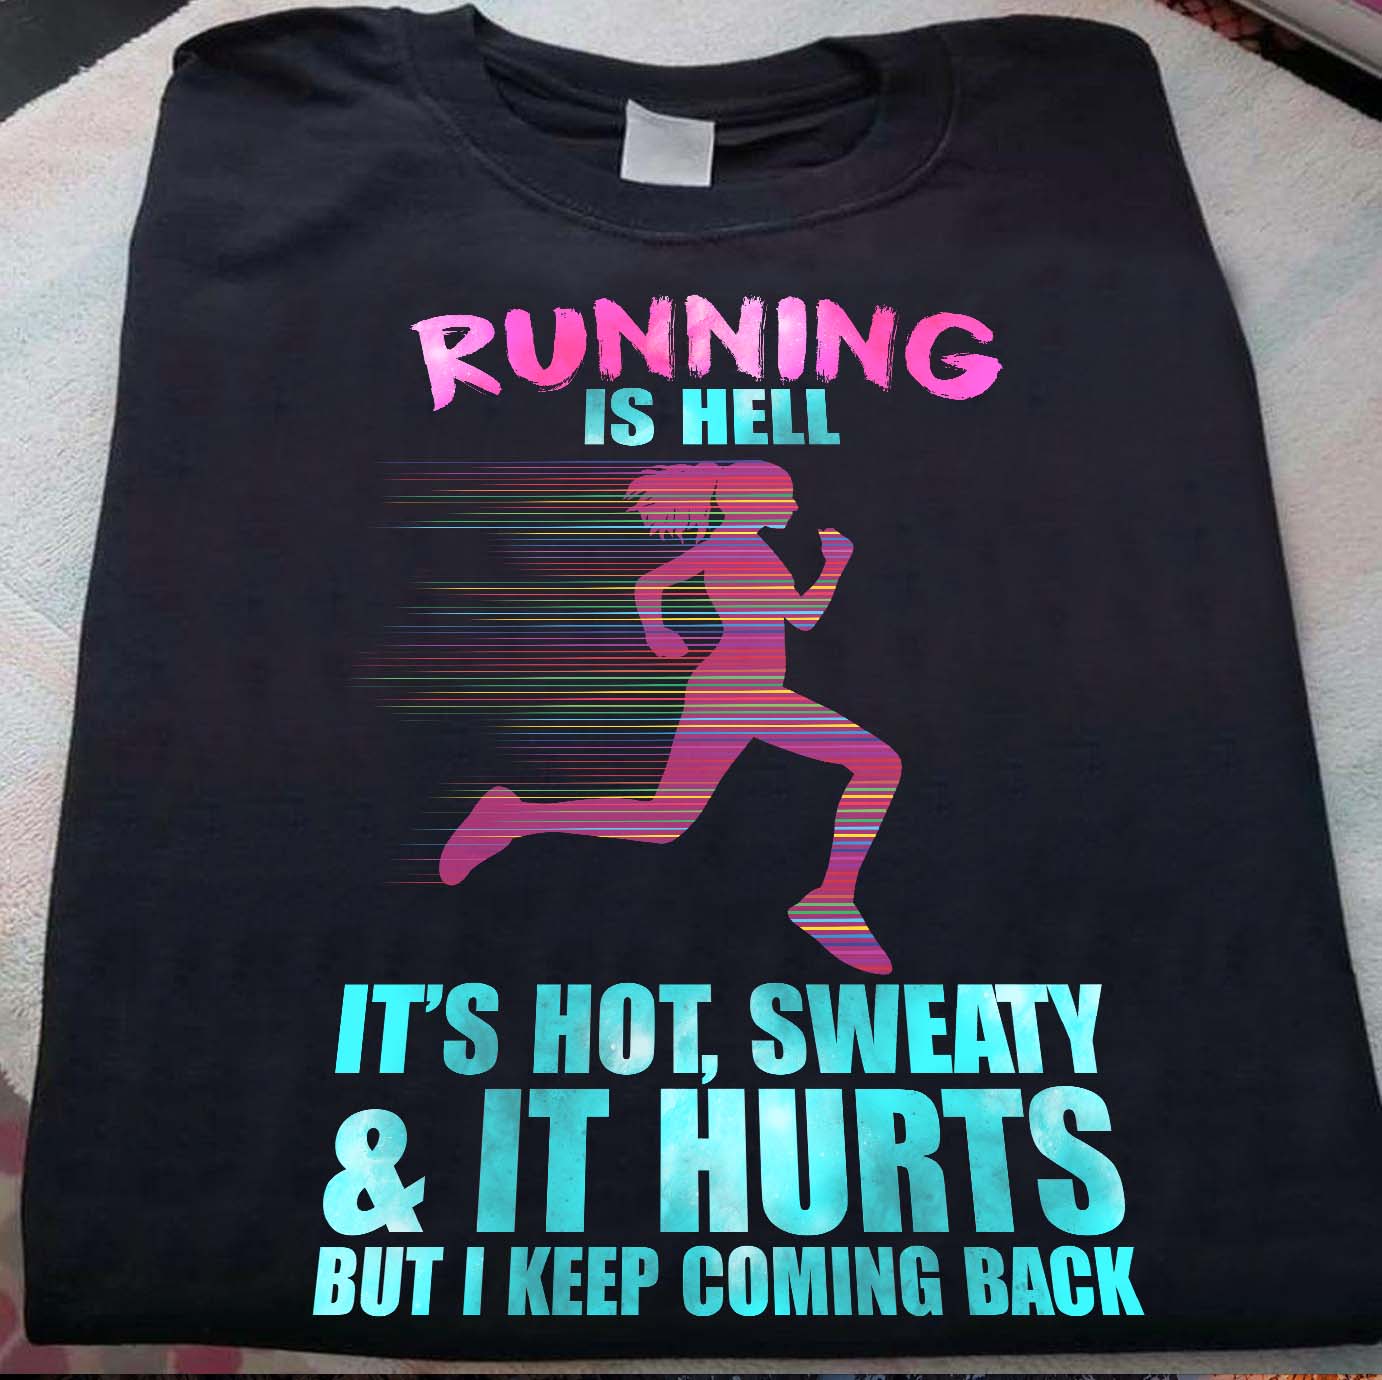 Running is hell it's hot, sweaty it hurts but I keep coming back - Running lover